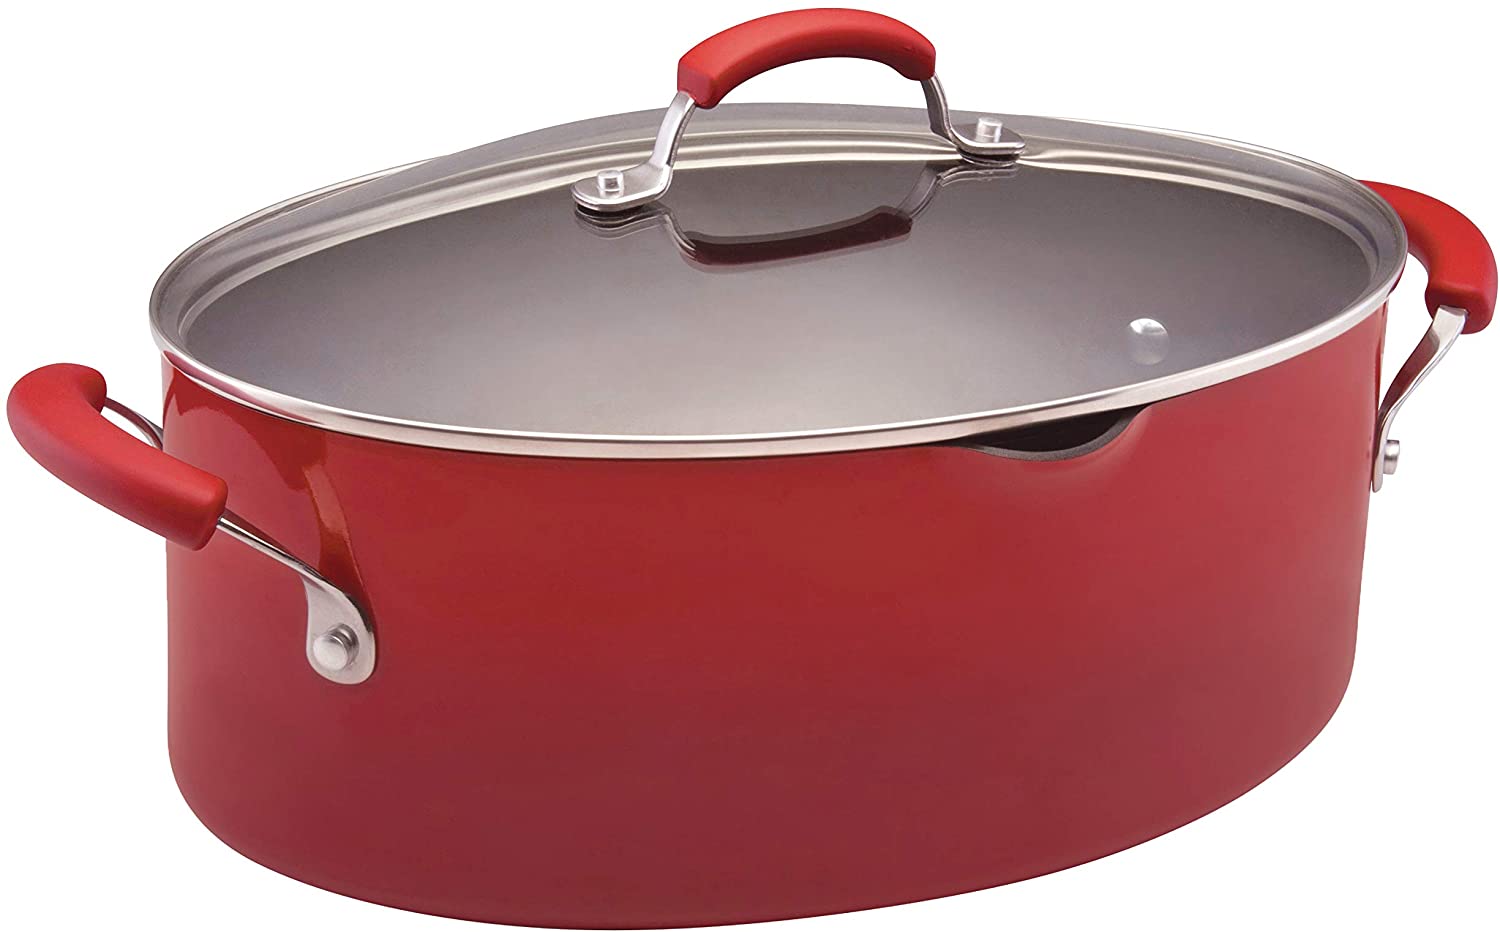 Rachael Ray Cucina Nonstick 8-Quart Oval Pasta Pot with Lid